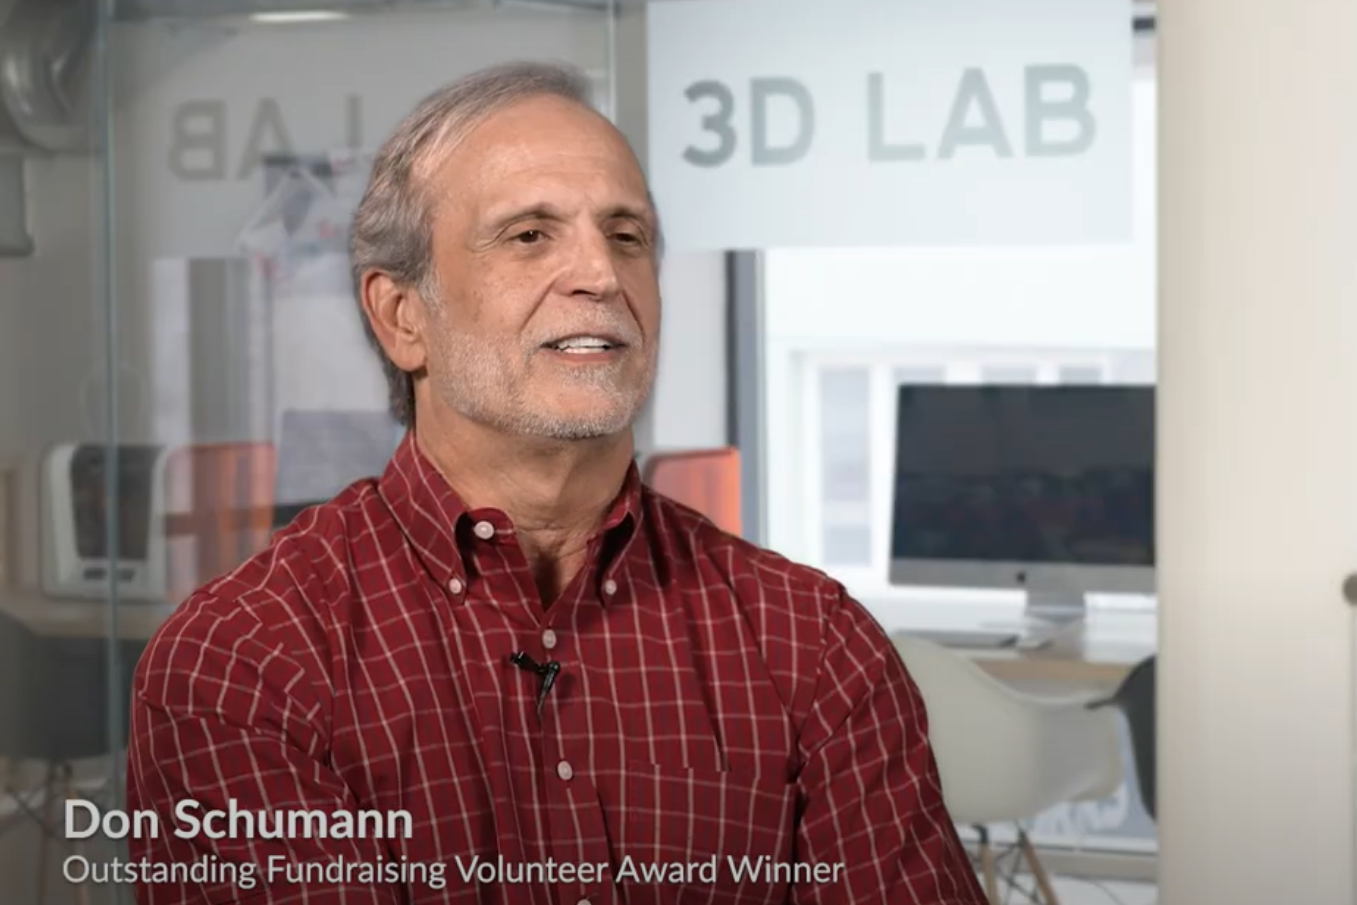 Inspiring video showcasing Don Schuman, recipient of the Outstanding Fundraising Volunteer Award by the Association for Fundraising Professionals.